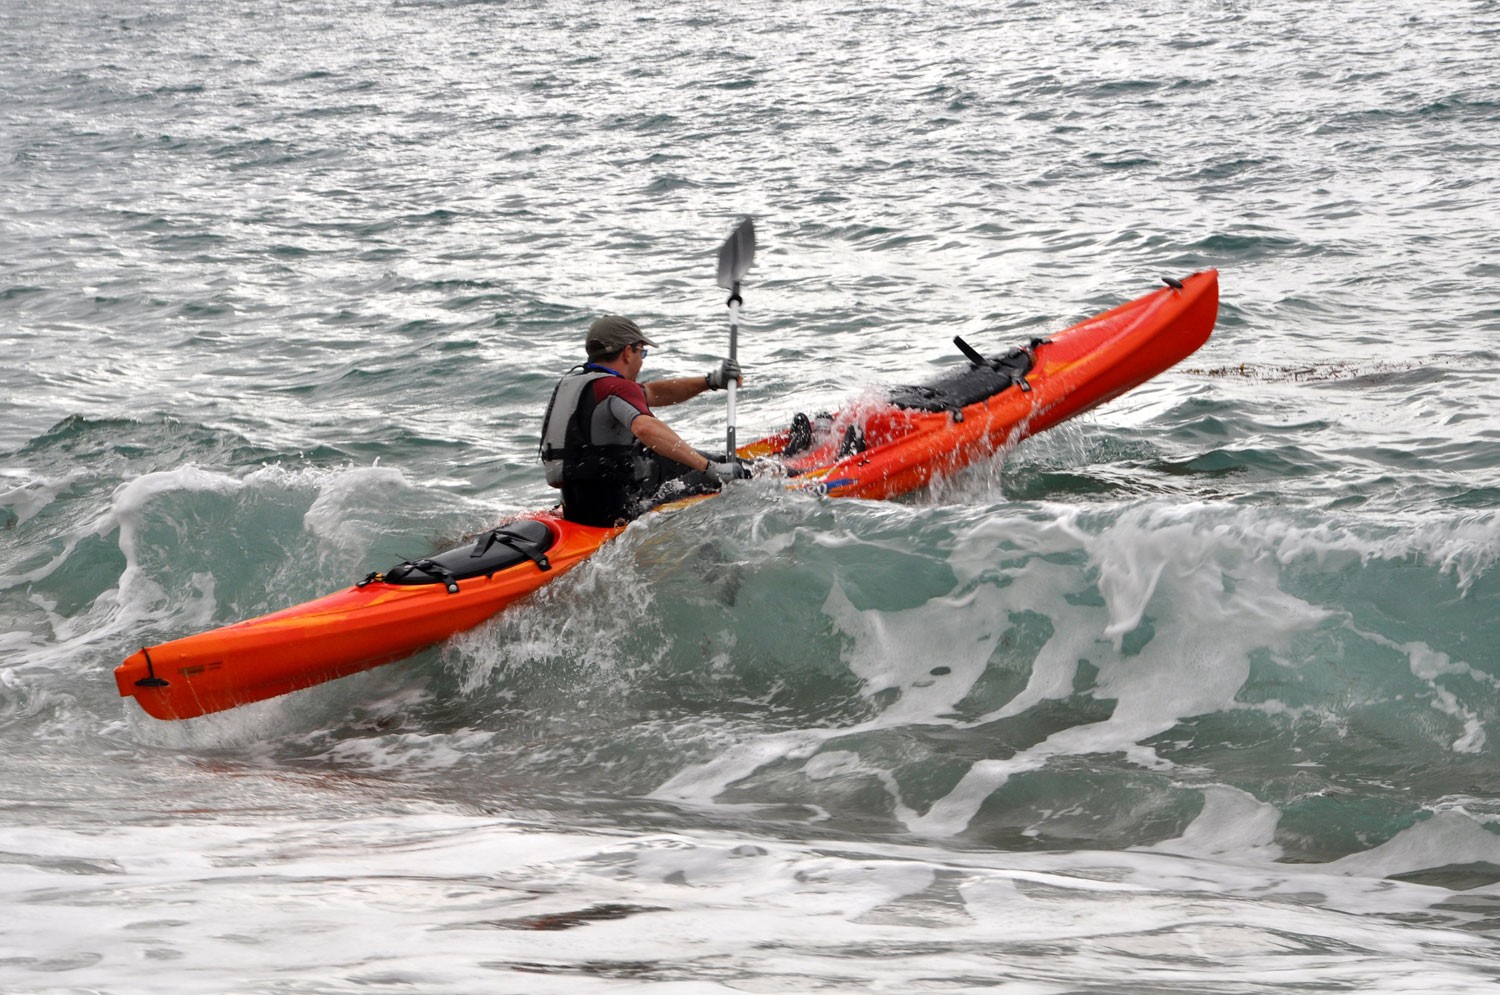 A sit-on-top kayaker breaking through small surf